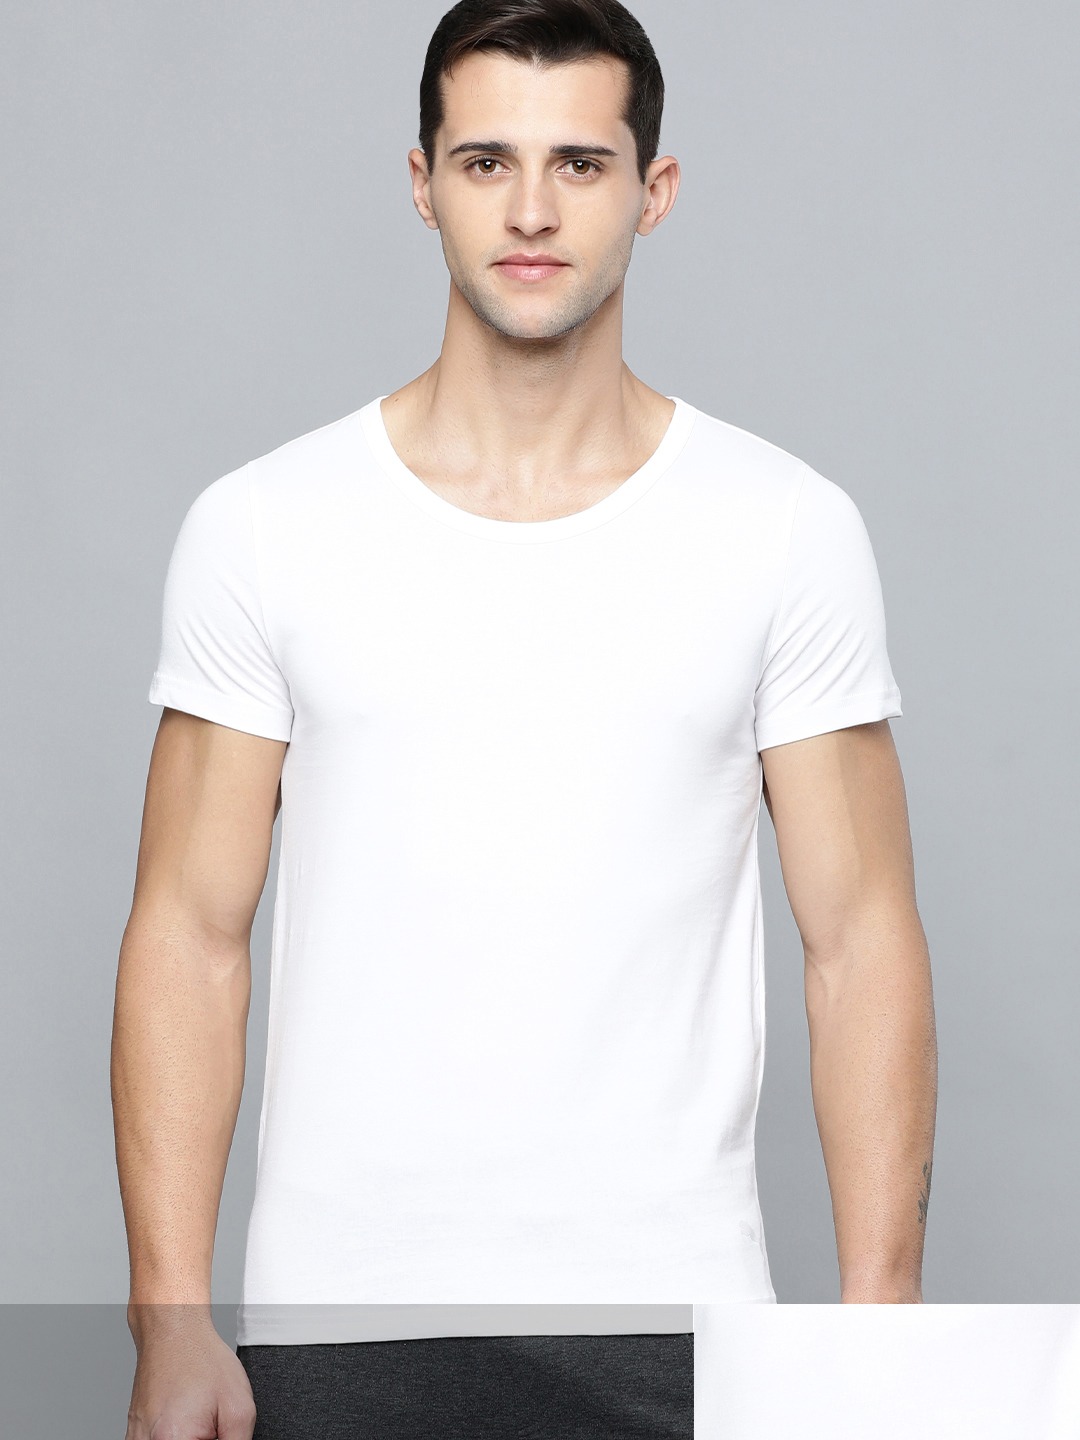 Clothing Innerwear Vests | Puma Men Pack of 2 White Solid Pure Cotton Basic Crew Innerwear Vests - GS37739